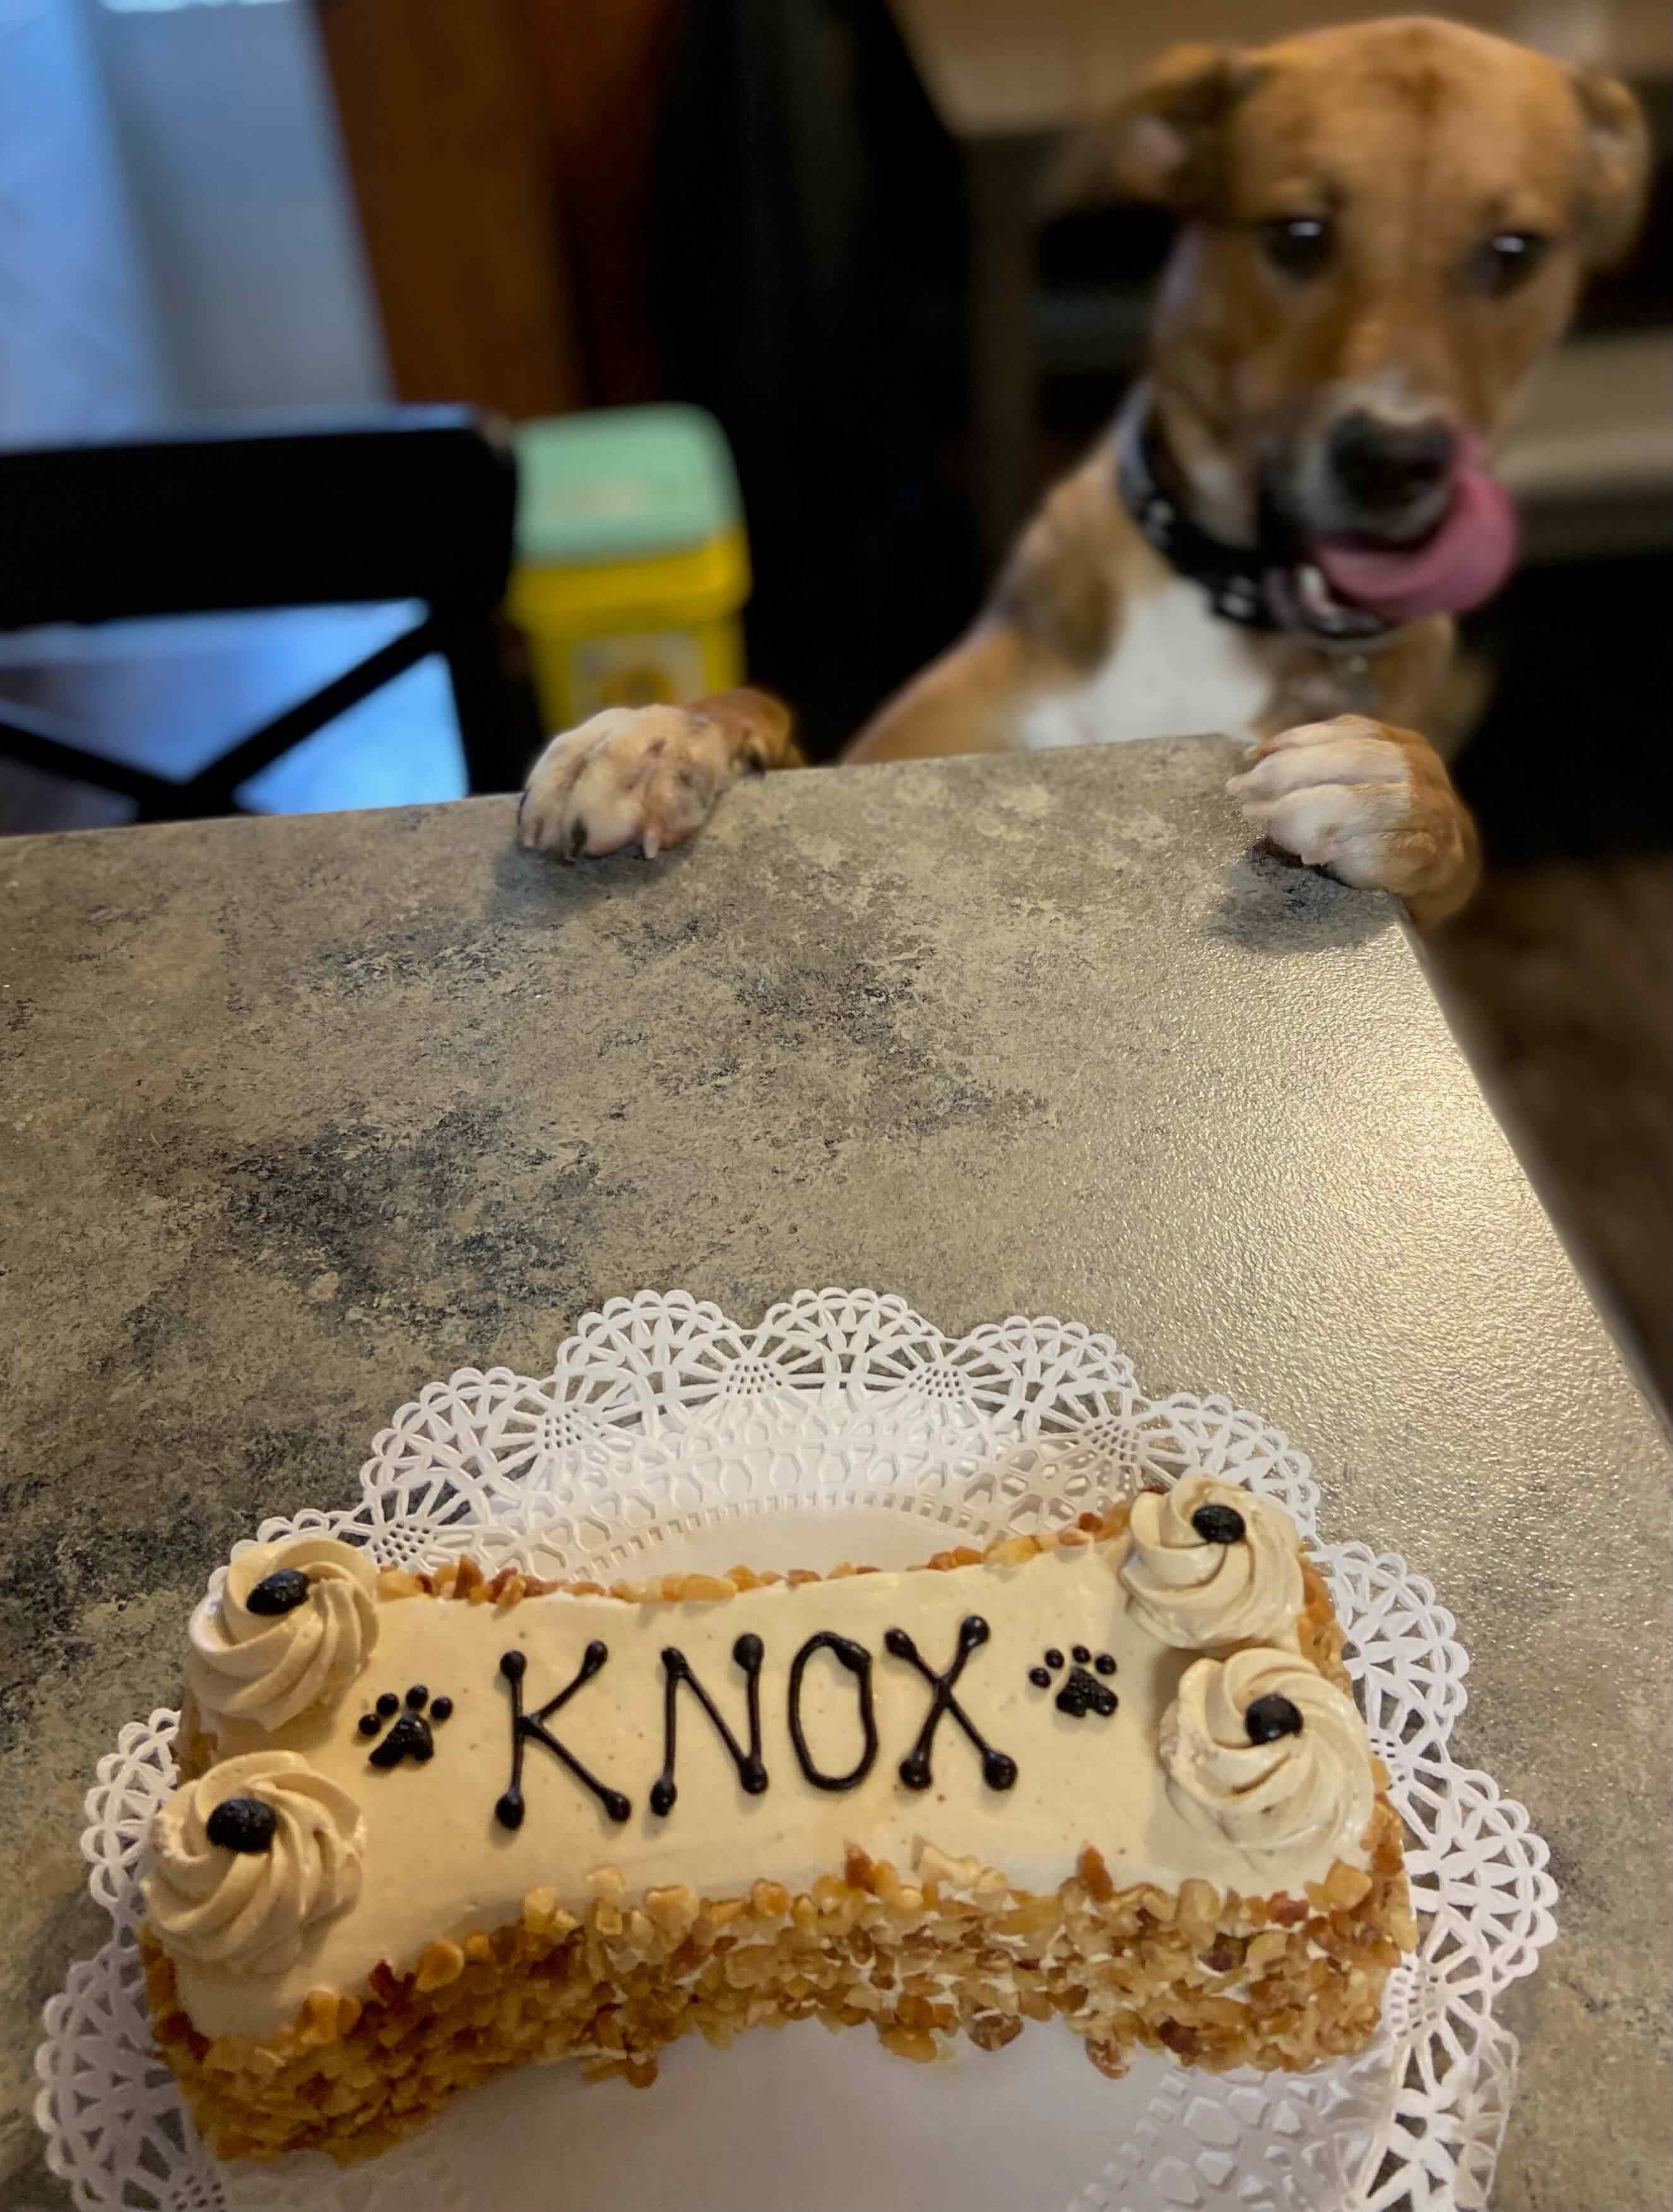 knox loves the cake